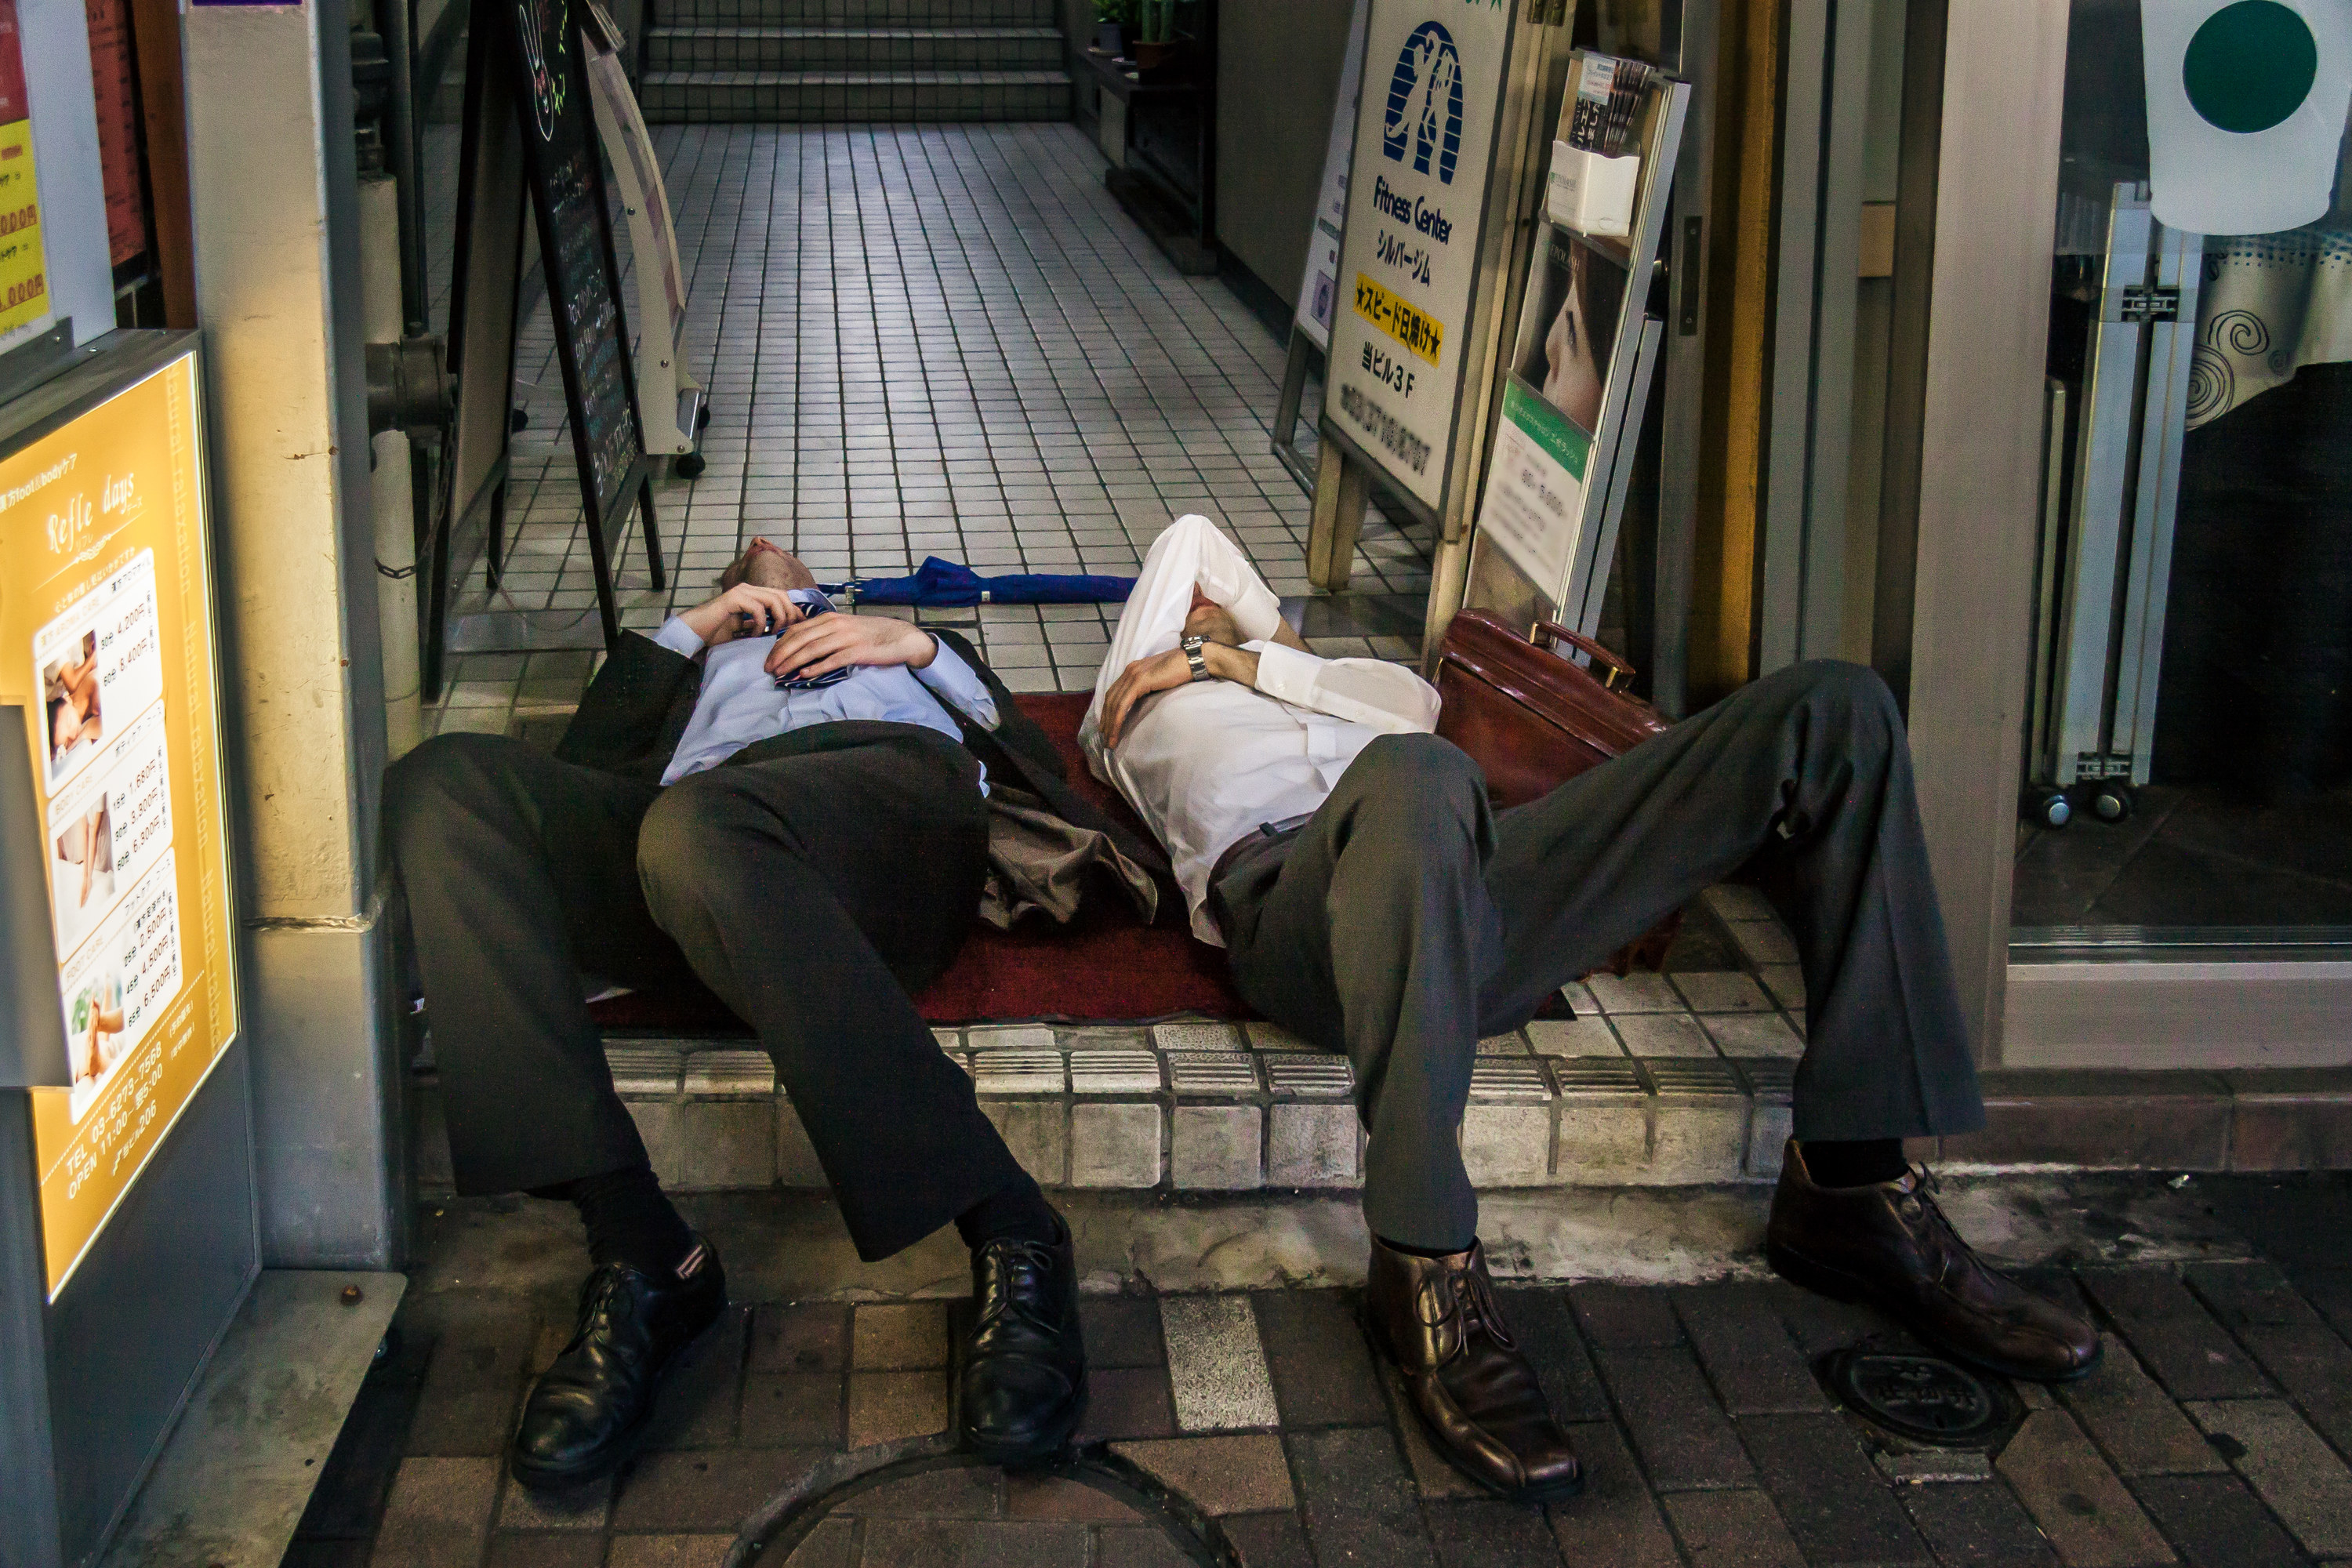 Two men in suits passed out on the street